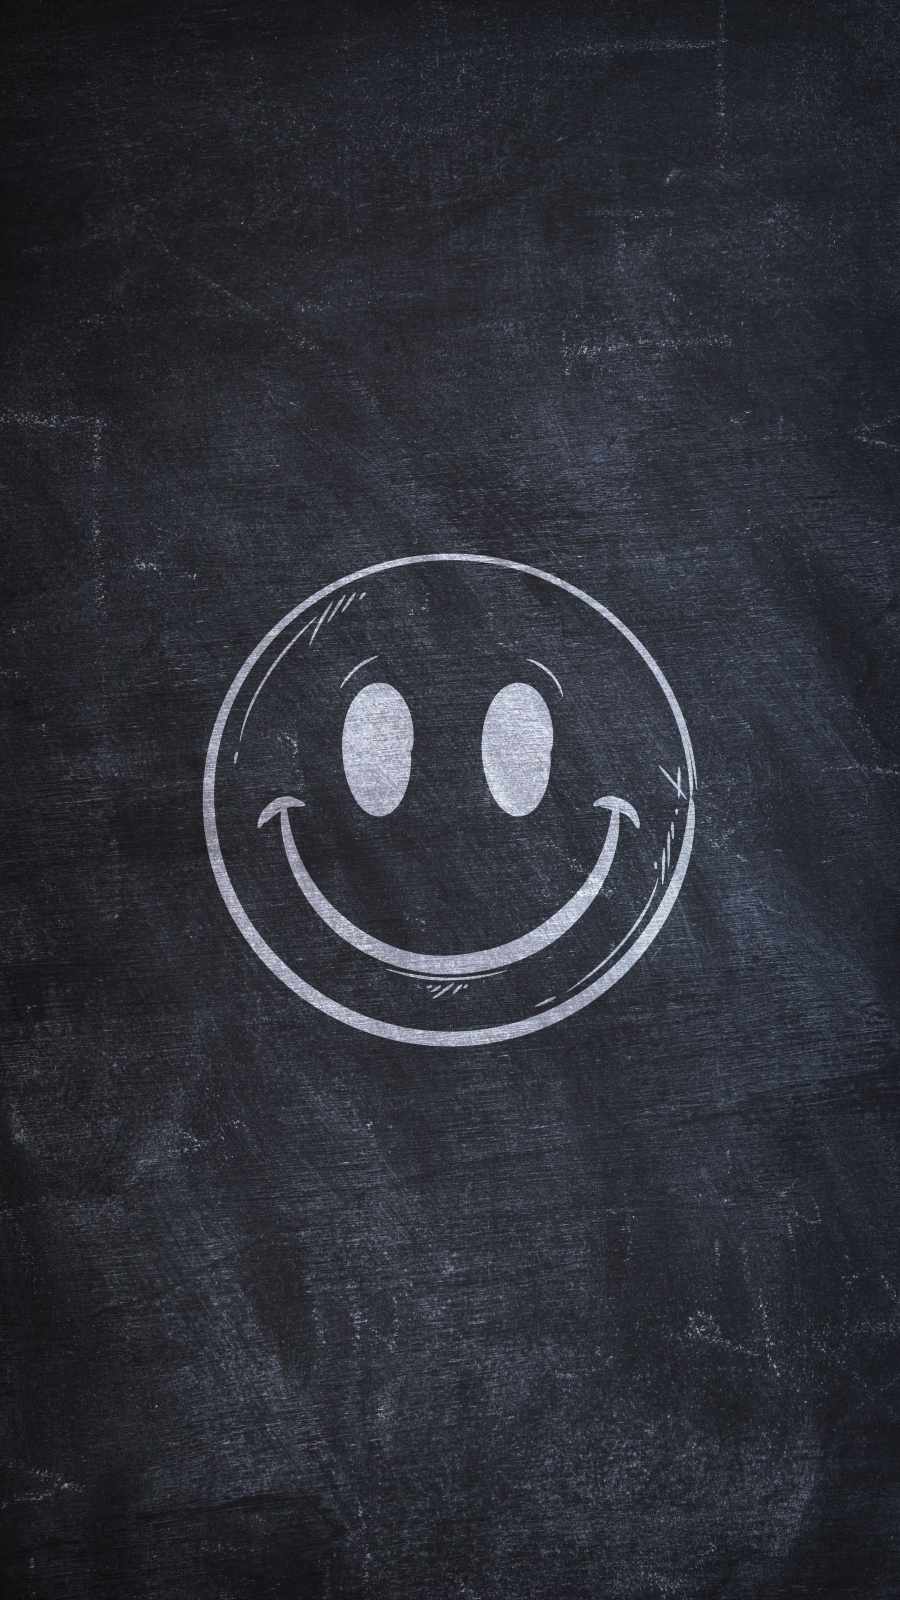 Smiling Face IPhone Wallpaper HD - IPhone Wallpapers : iPhone Wallpapers